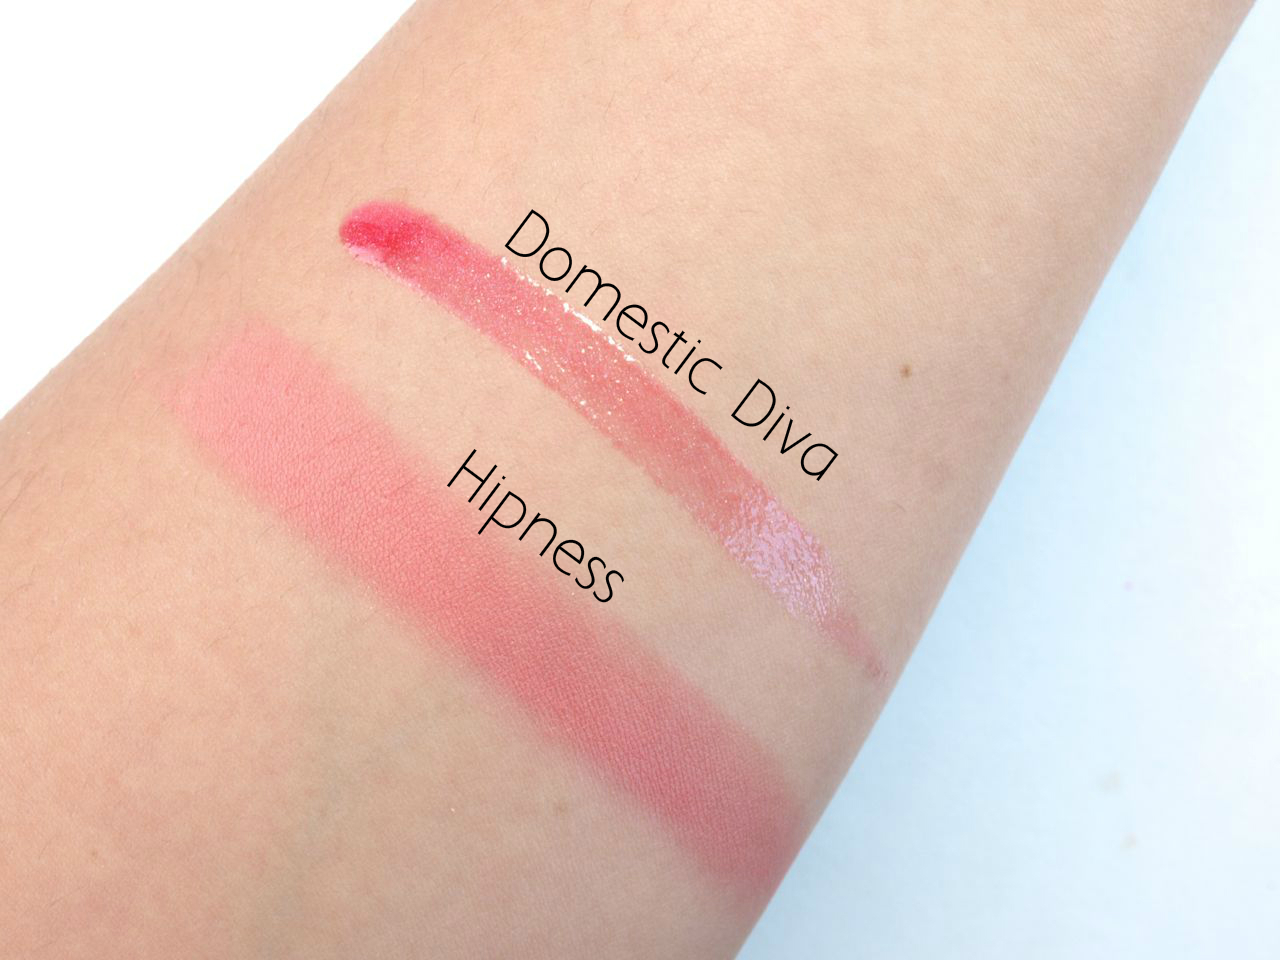 Mac Wash & Dry Lipglass in "Domestic Diva" & Powder Blush in "Hipness": Review and Swatches 